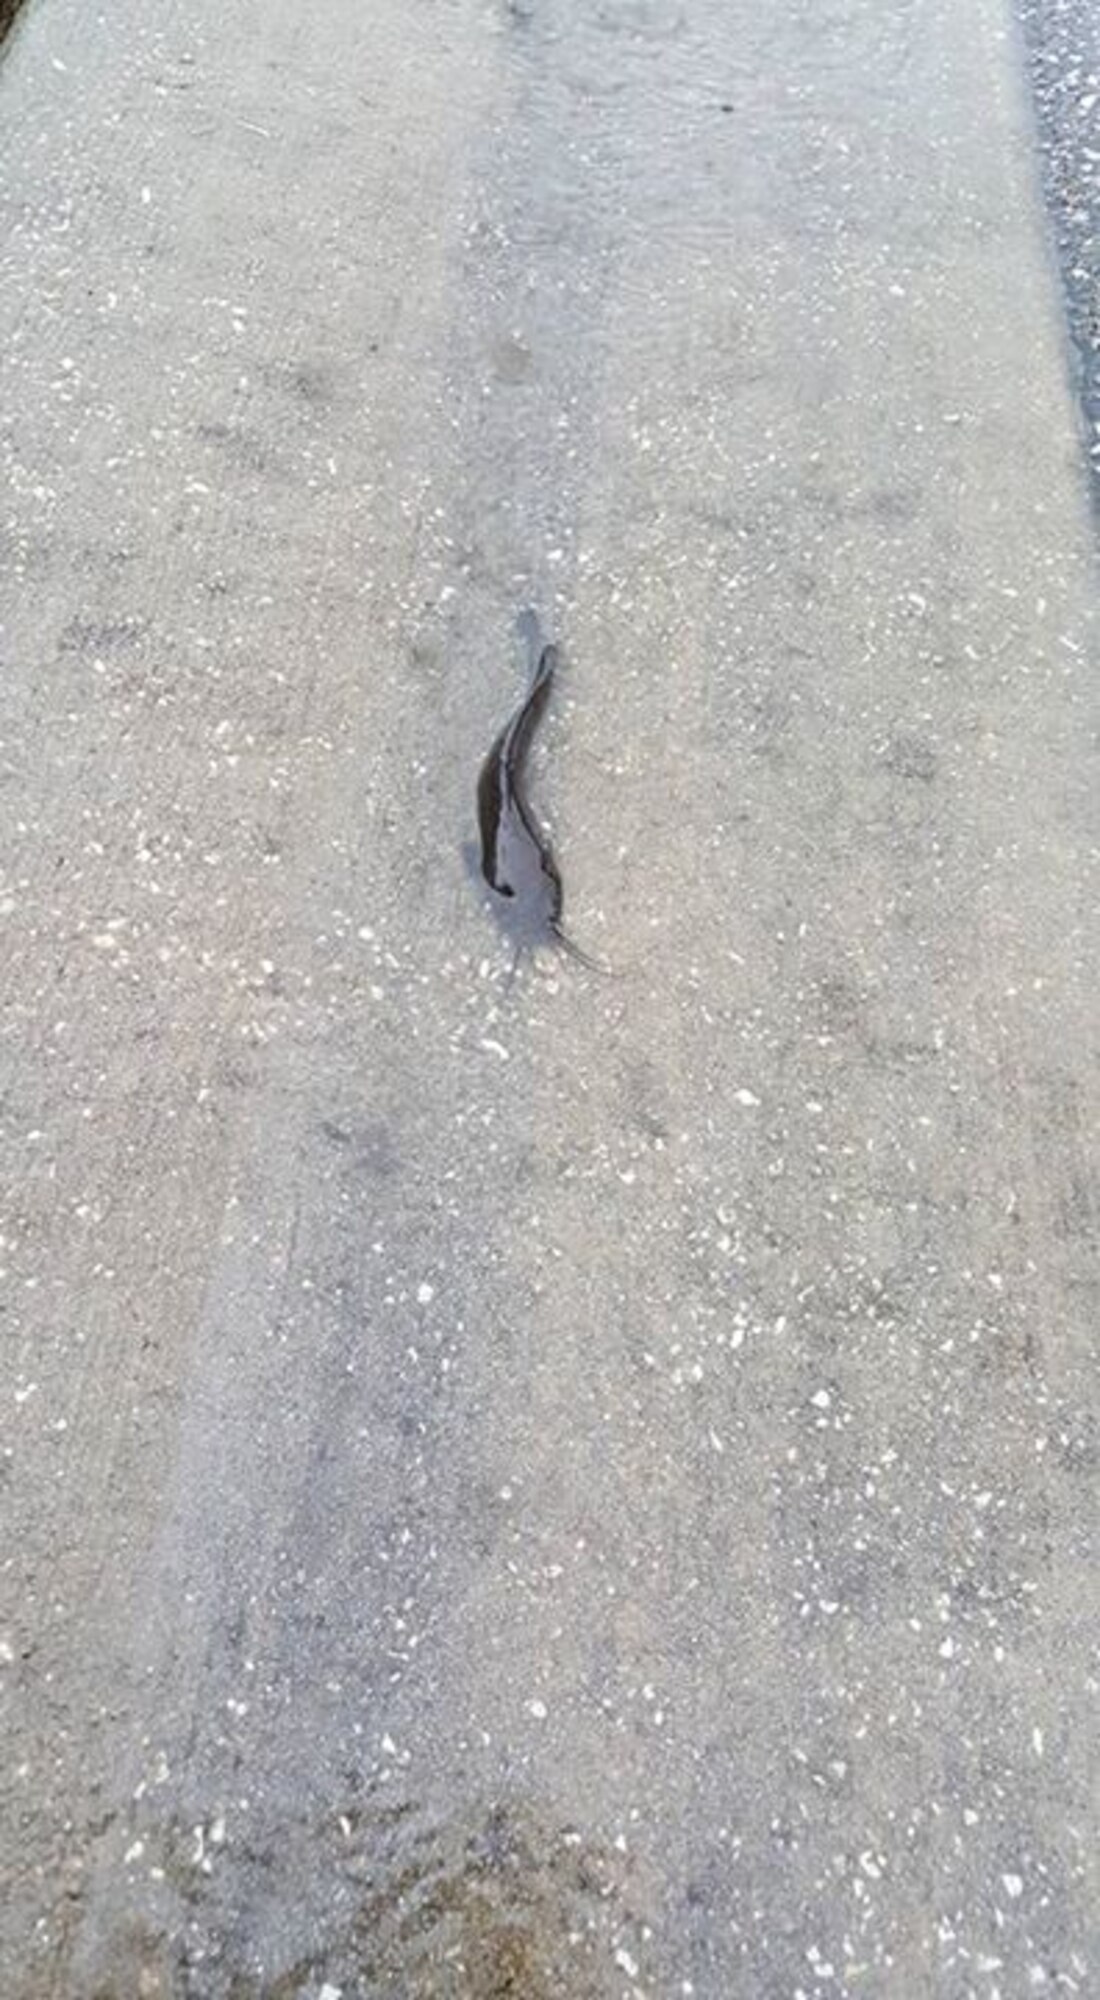 A walking catfish explores the streets of MacDill Air Force Base, Fla., Aug. 3, 2015. Staff Sgt. Christopher Salazar, 6th Security Forces Squadron installation patrolman, spotted the fish during minor flooding that was caused by a recent rainstorm. (Courtesy photo)